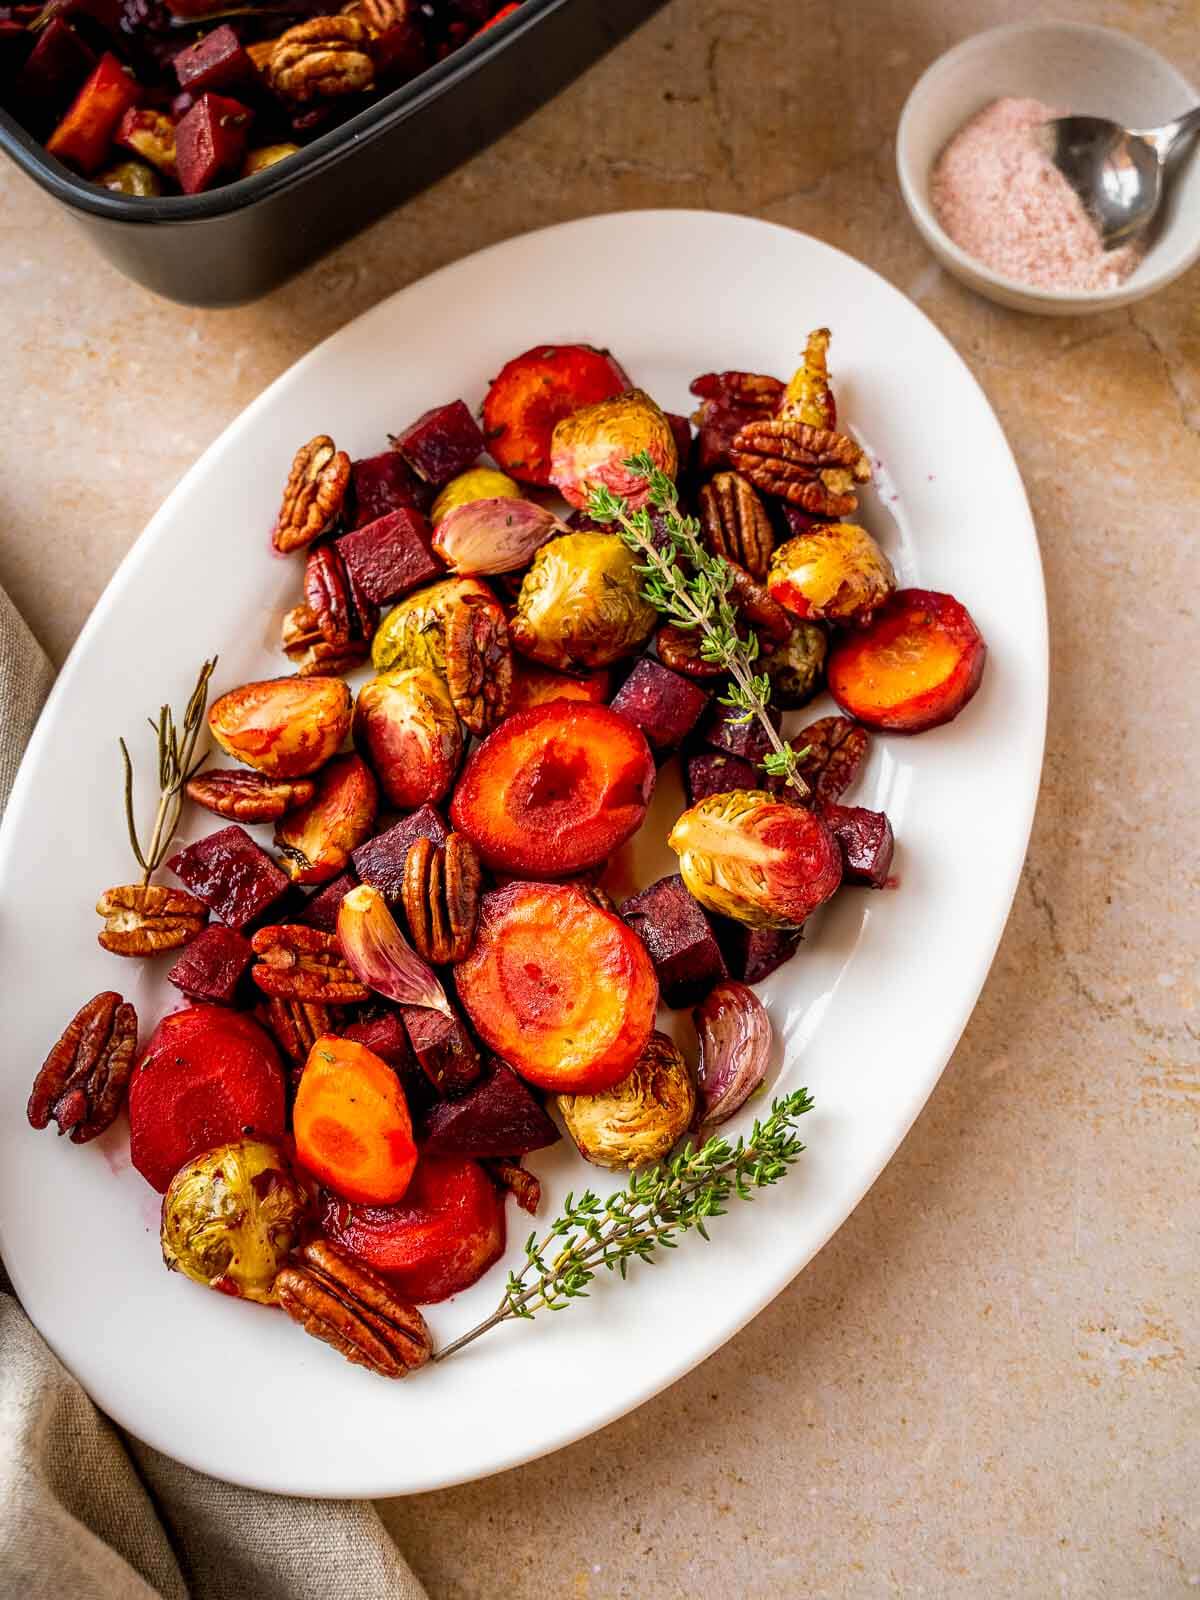 Mediterranean Honey Roasted Vegetables with Brussels Sprouts.